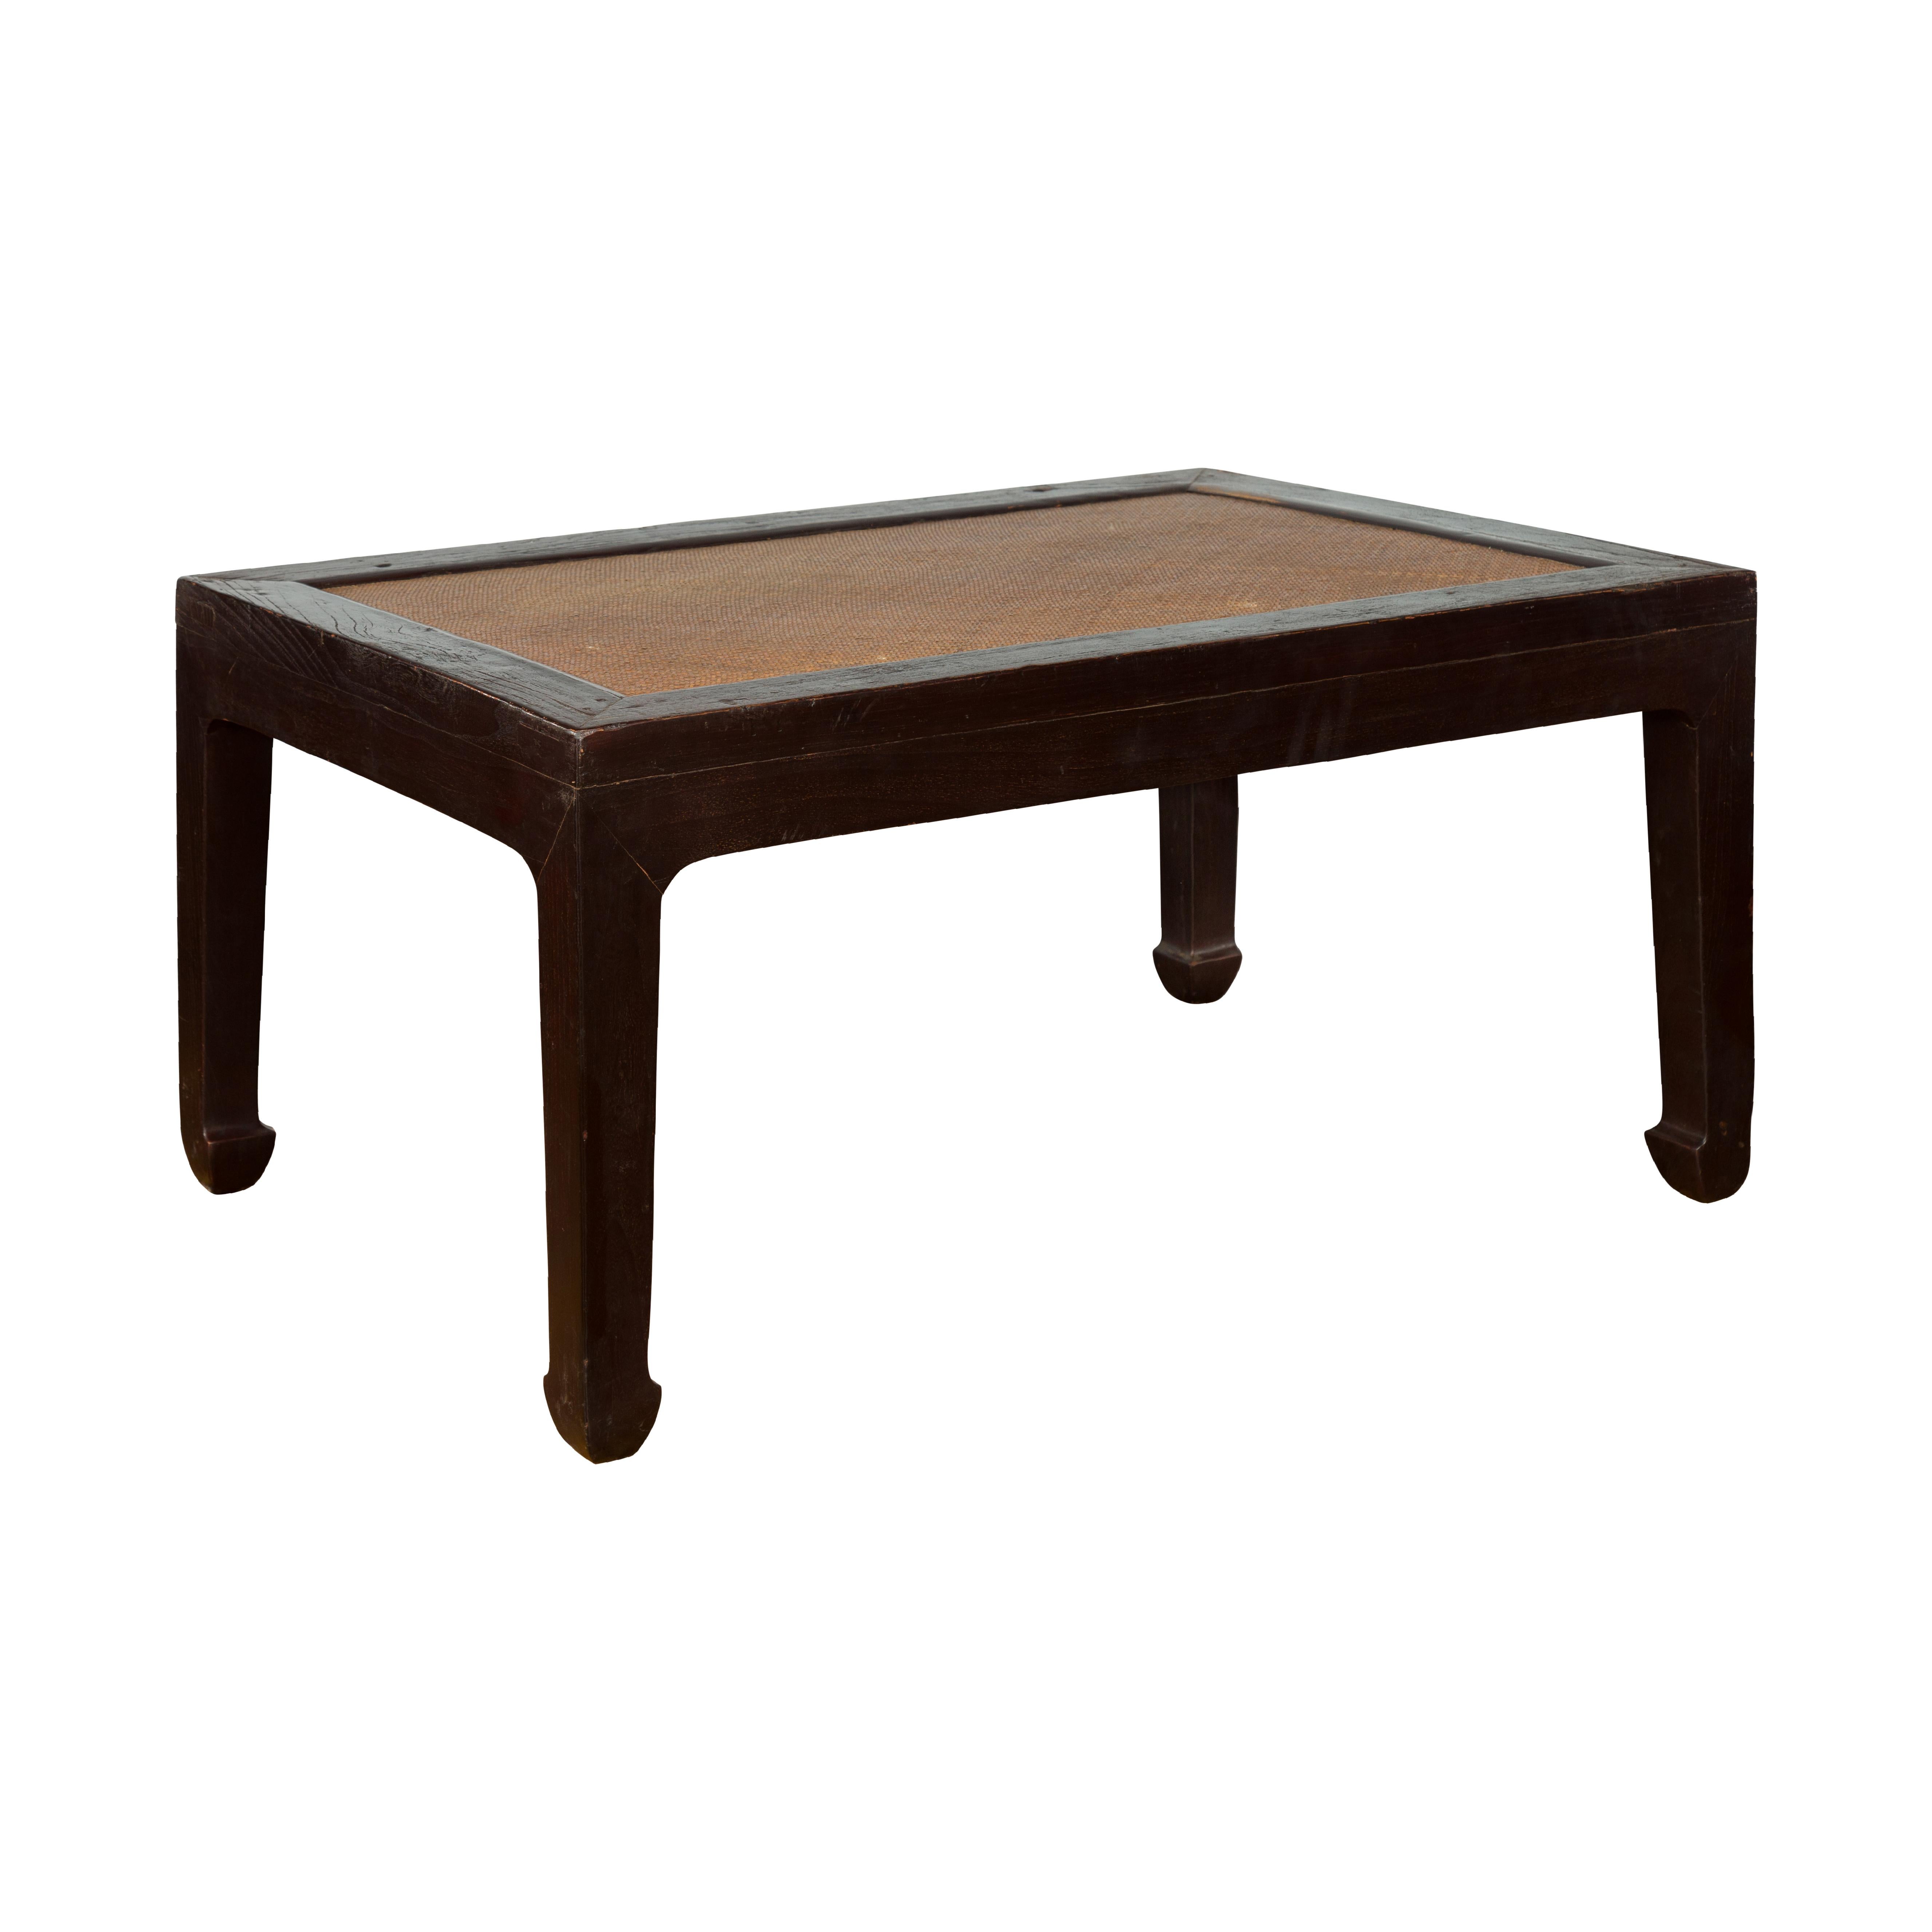 A Chinese dark brown elm wood coffee table from the early 20th century, with rattan inset top and horse hoof extremities. Created in China during the early years of the 20th century, this coffee table features a rectangular top with rattan inset